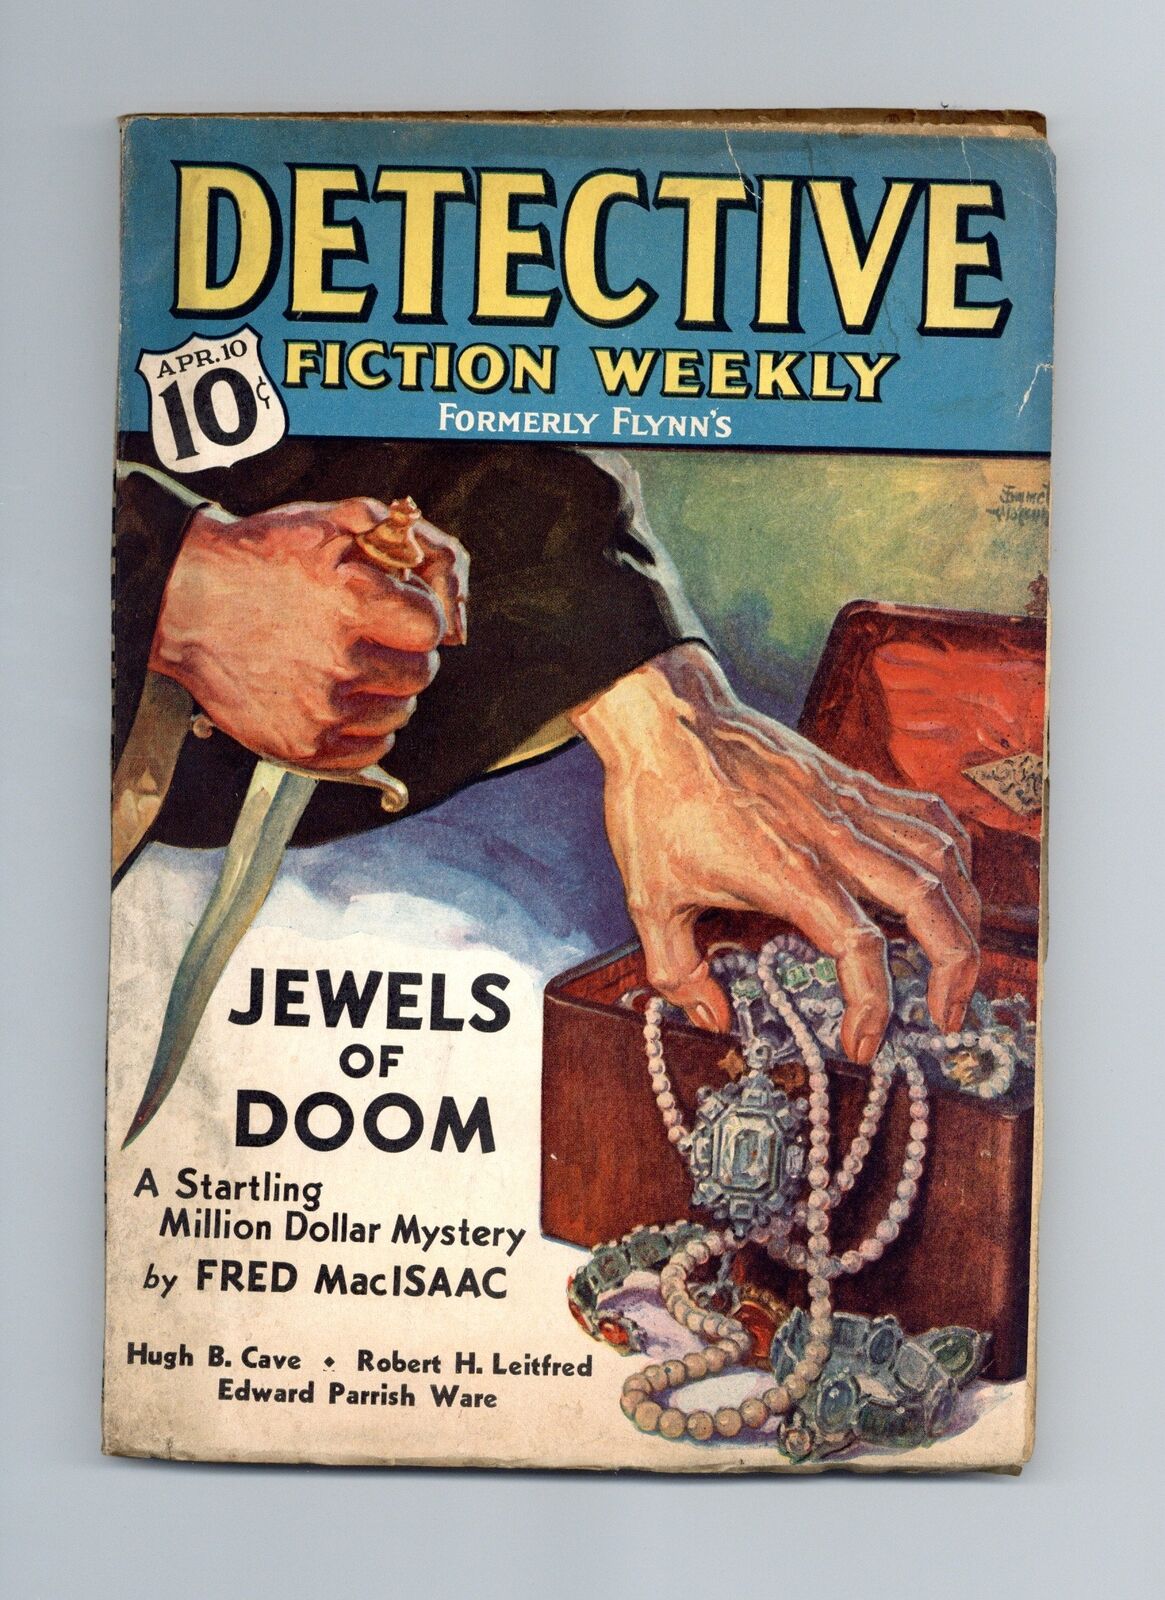 Detective Fiction Weekly Pulp Apr 10 1937 Vol. 110 #1 VG+ 4.5